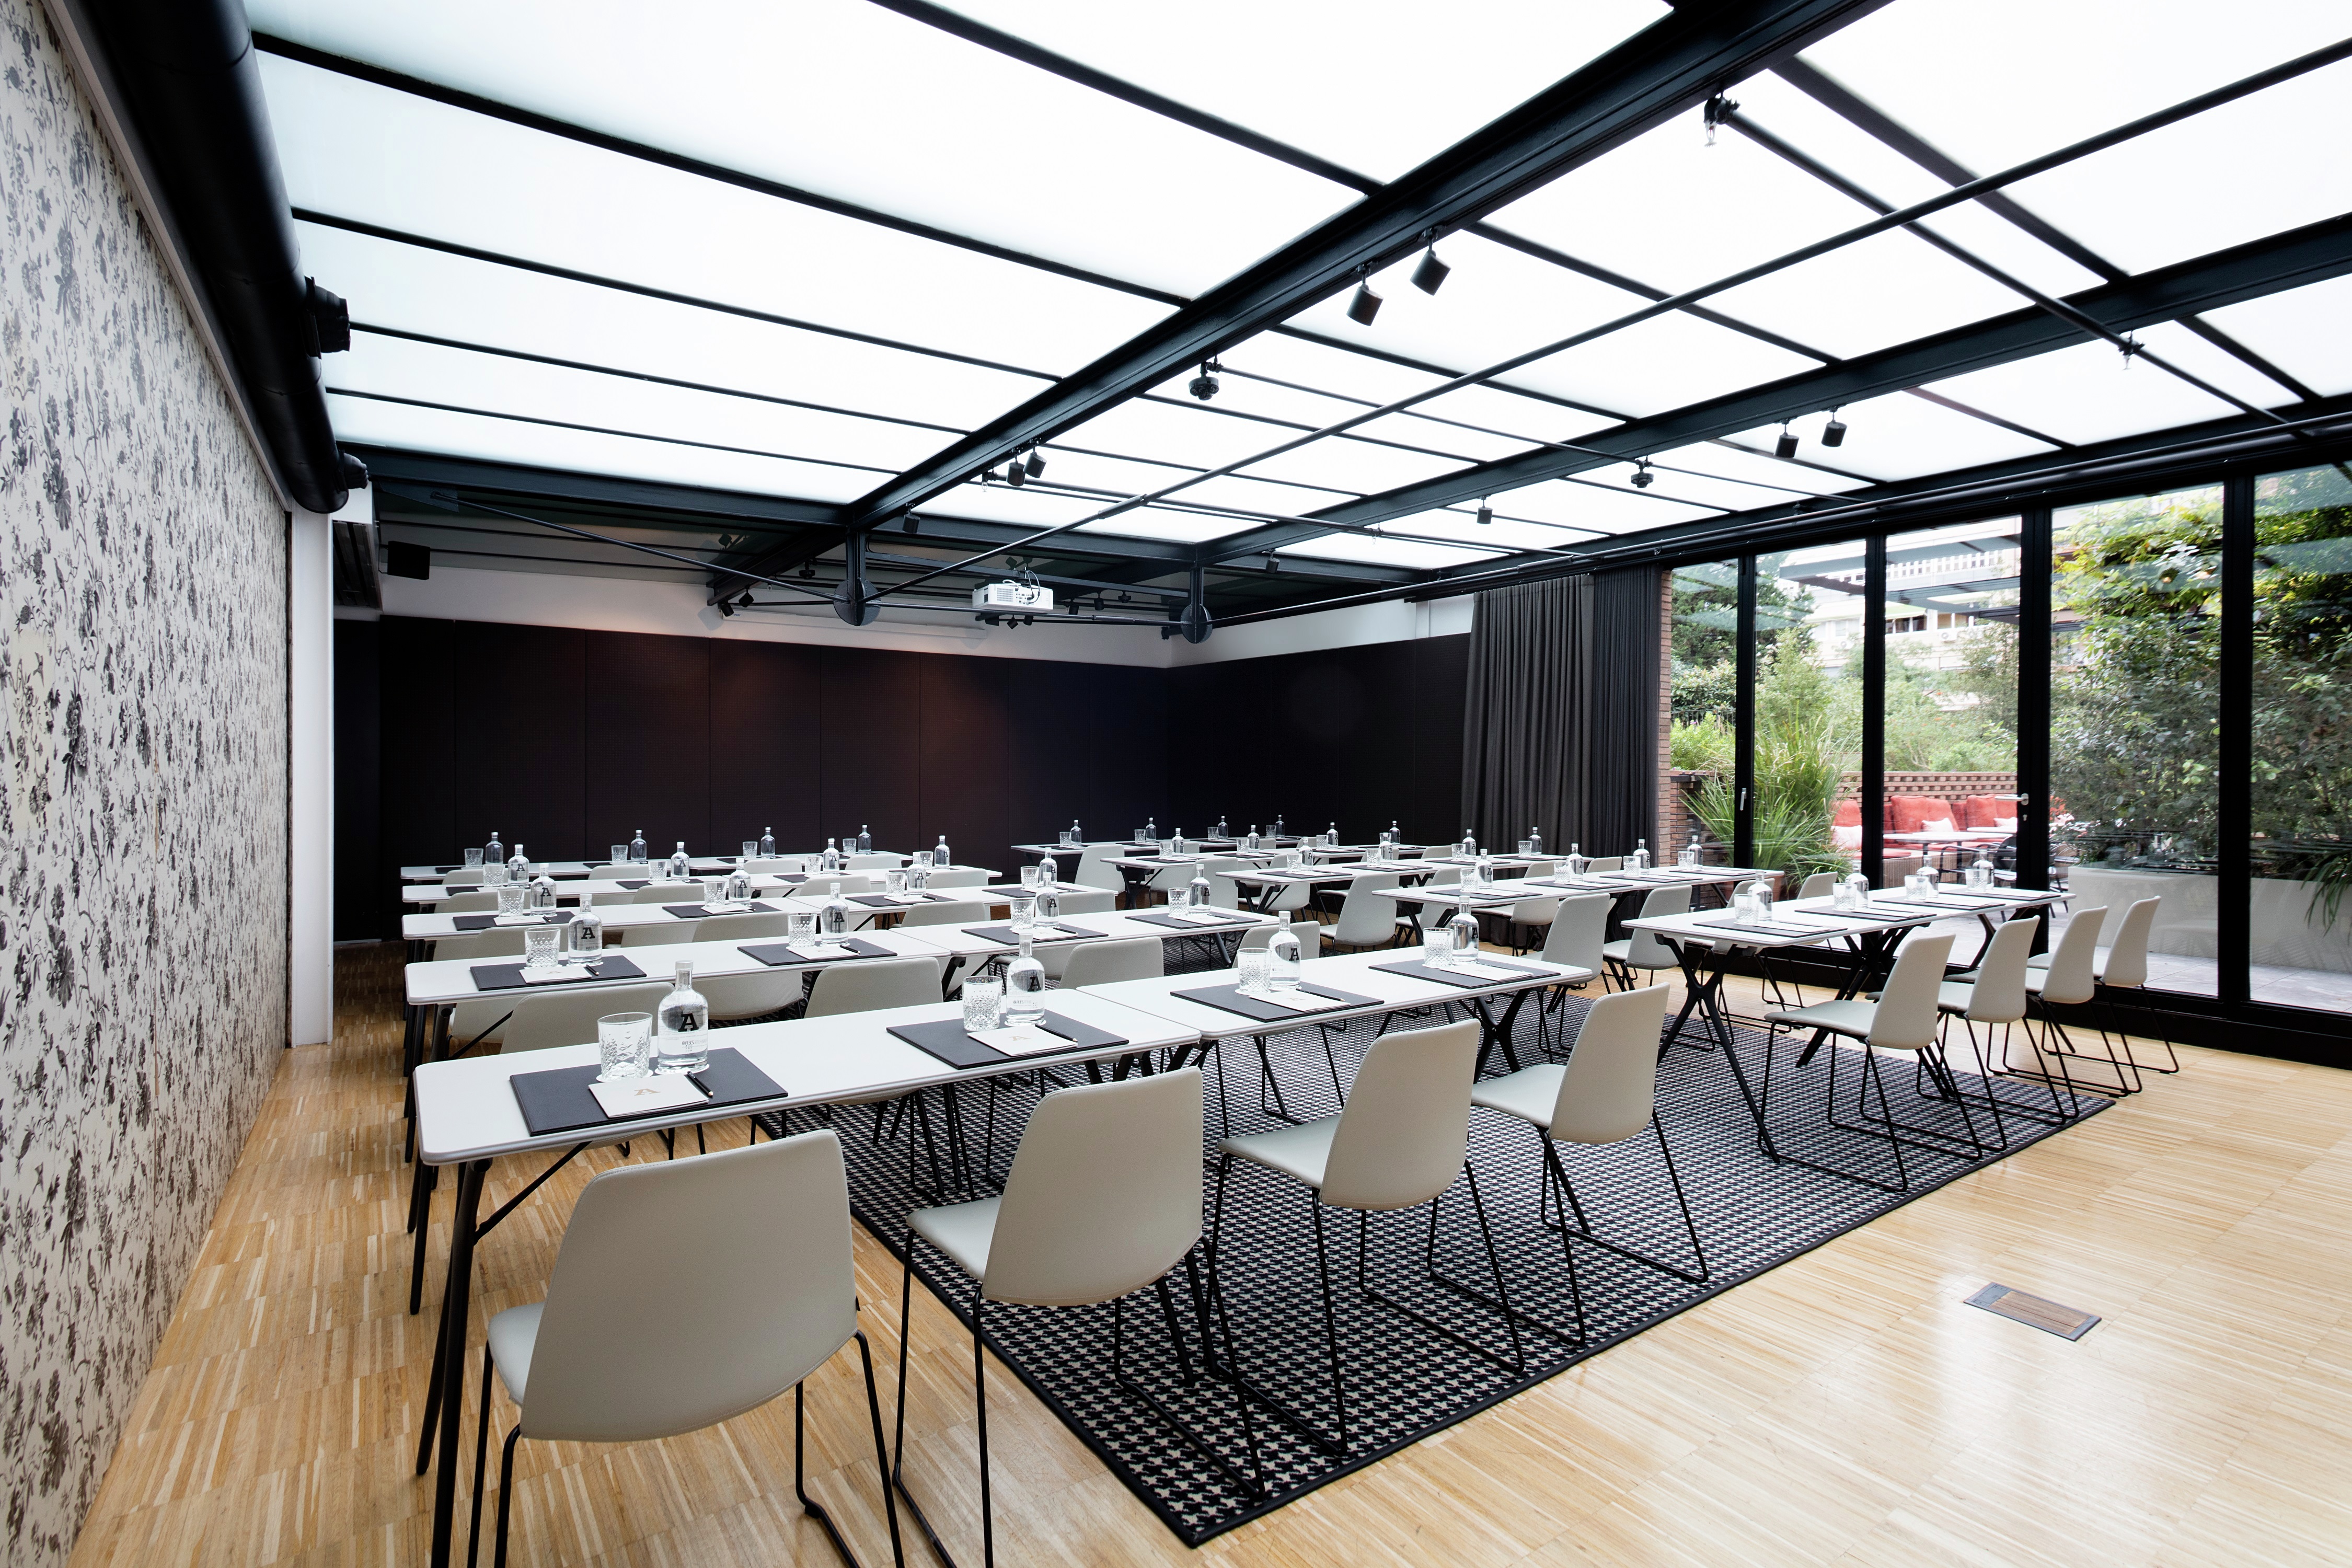 Alexandra Barcelona Curio Hotel Ballroom with Tables, Chairs, and Outside View